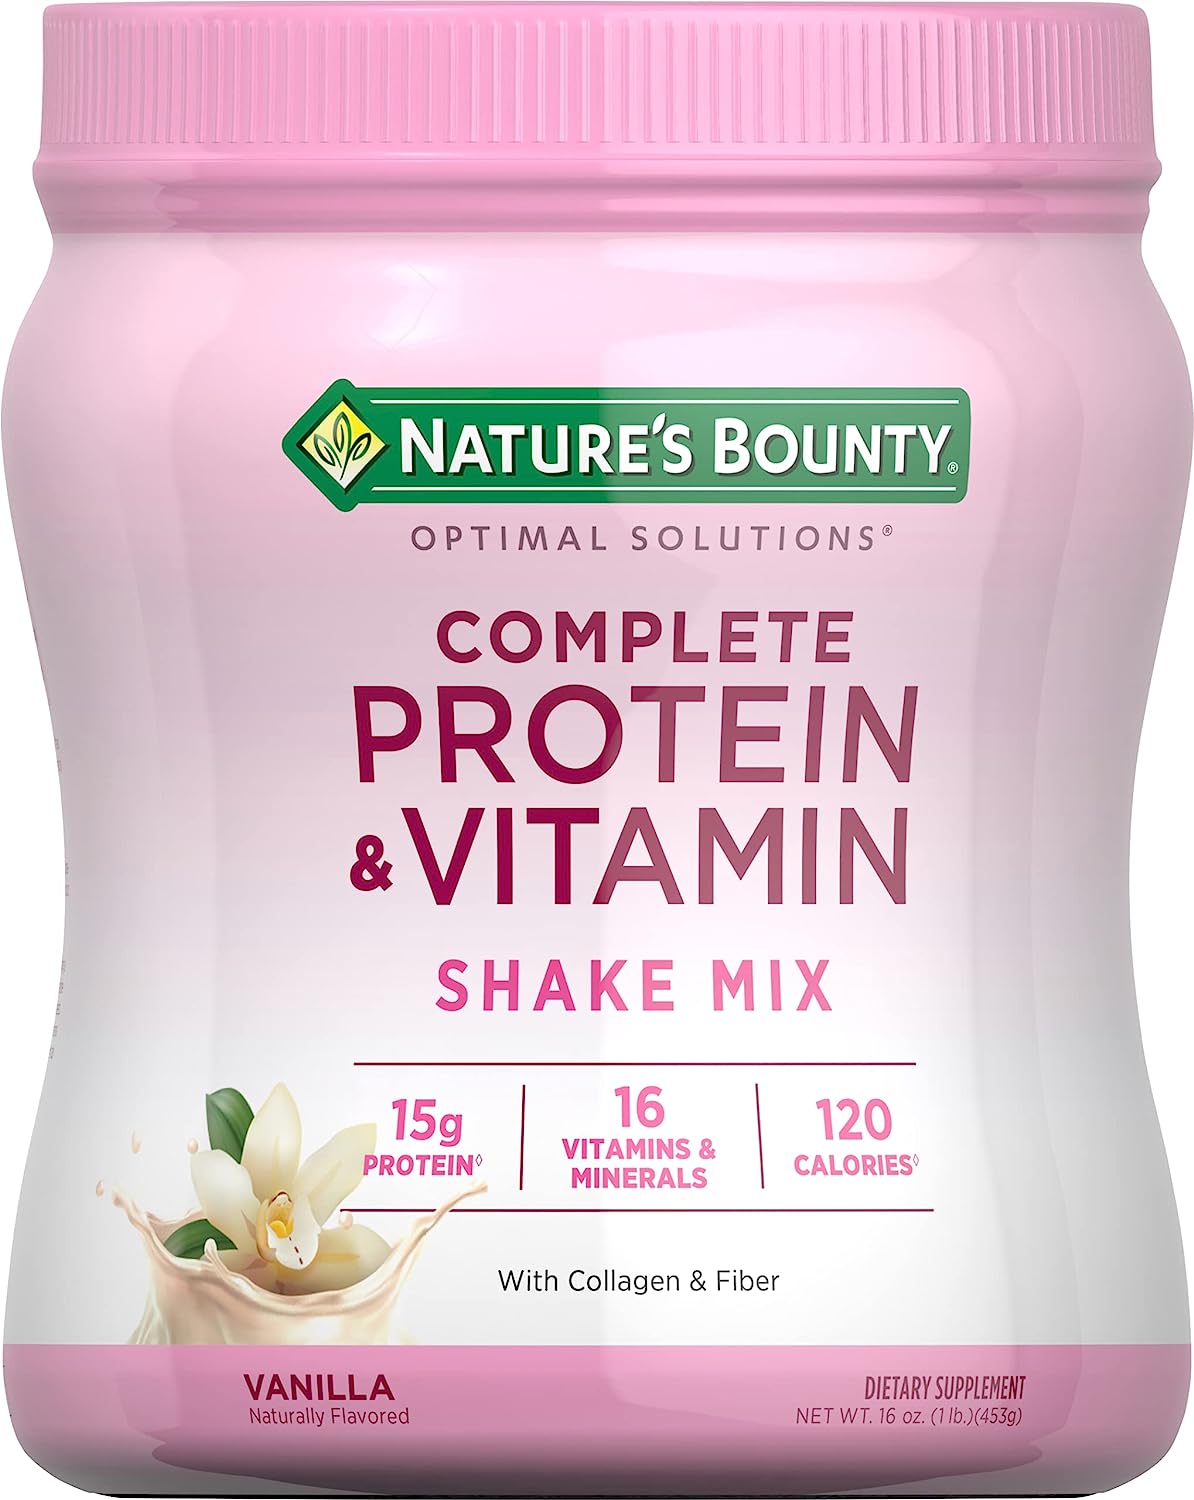 1-Lb Nature's Bounty Complete Protein & Vitamin Shake Mix: Vanilla or Chocolate 2 for $19.70 ($9.85 each) w/ S&S + Free Shipping w/ Prime or $25+